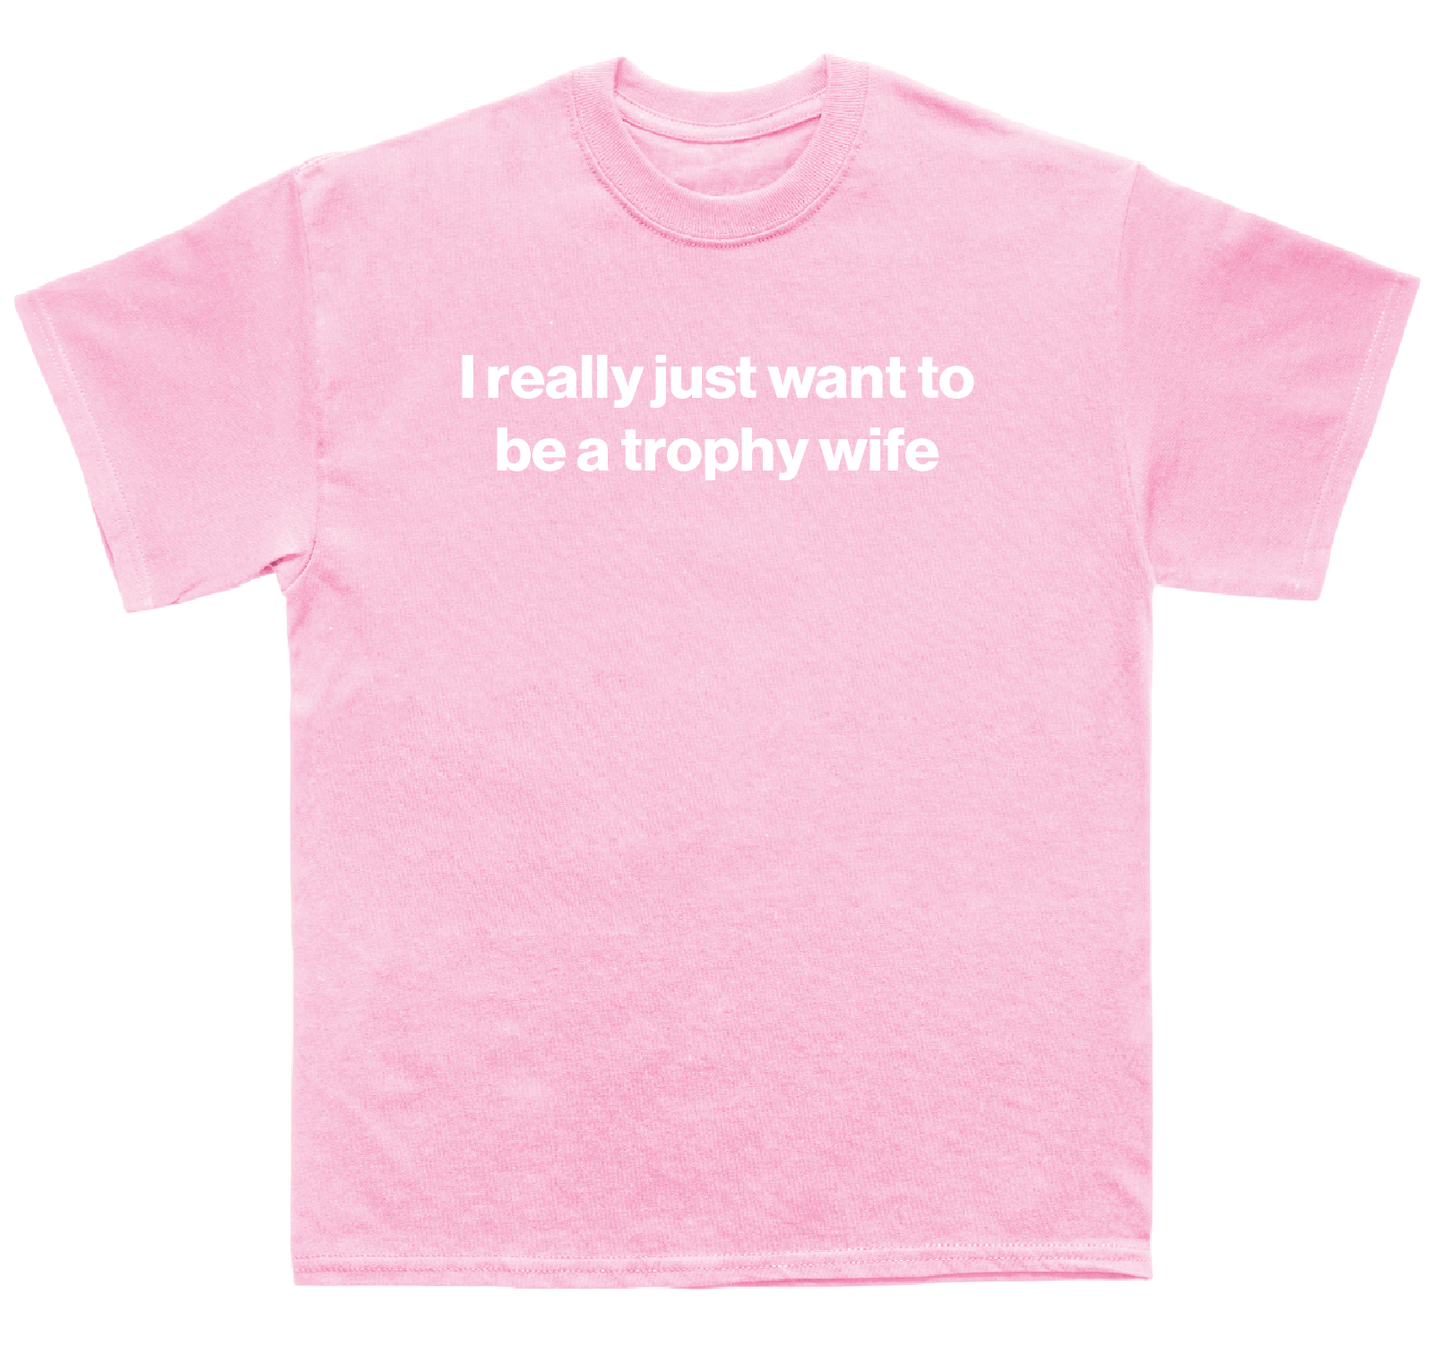 I really just want to be a trophy wife shirt